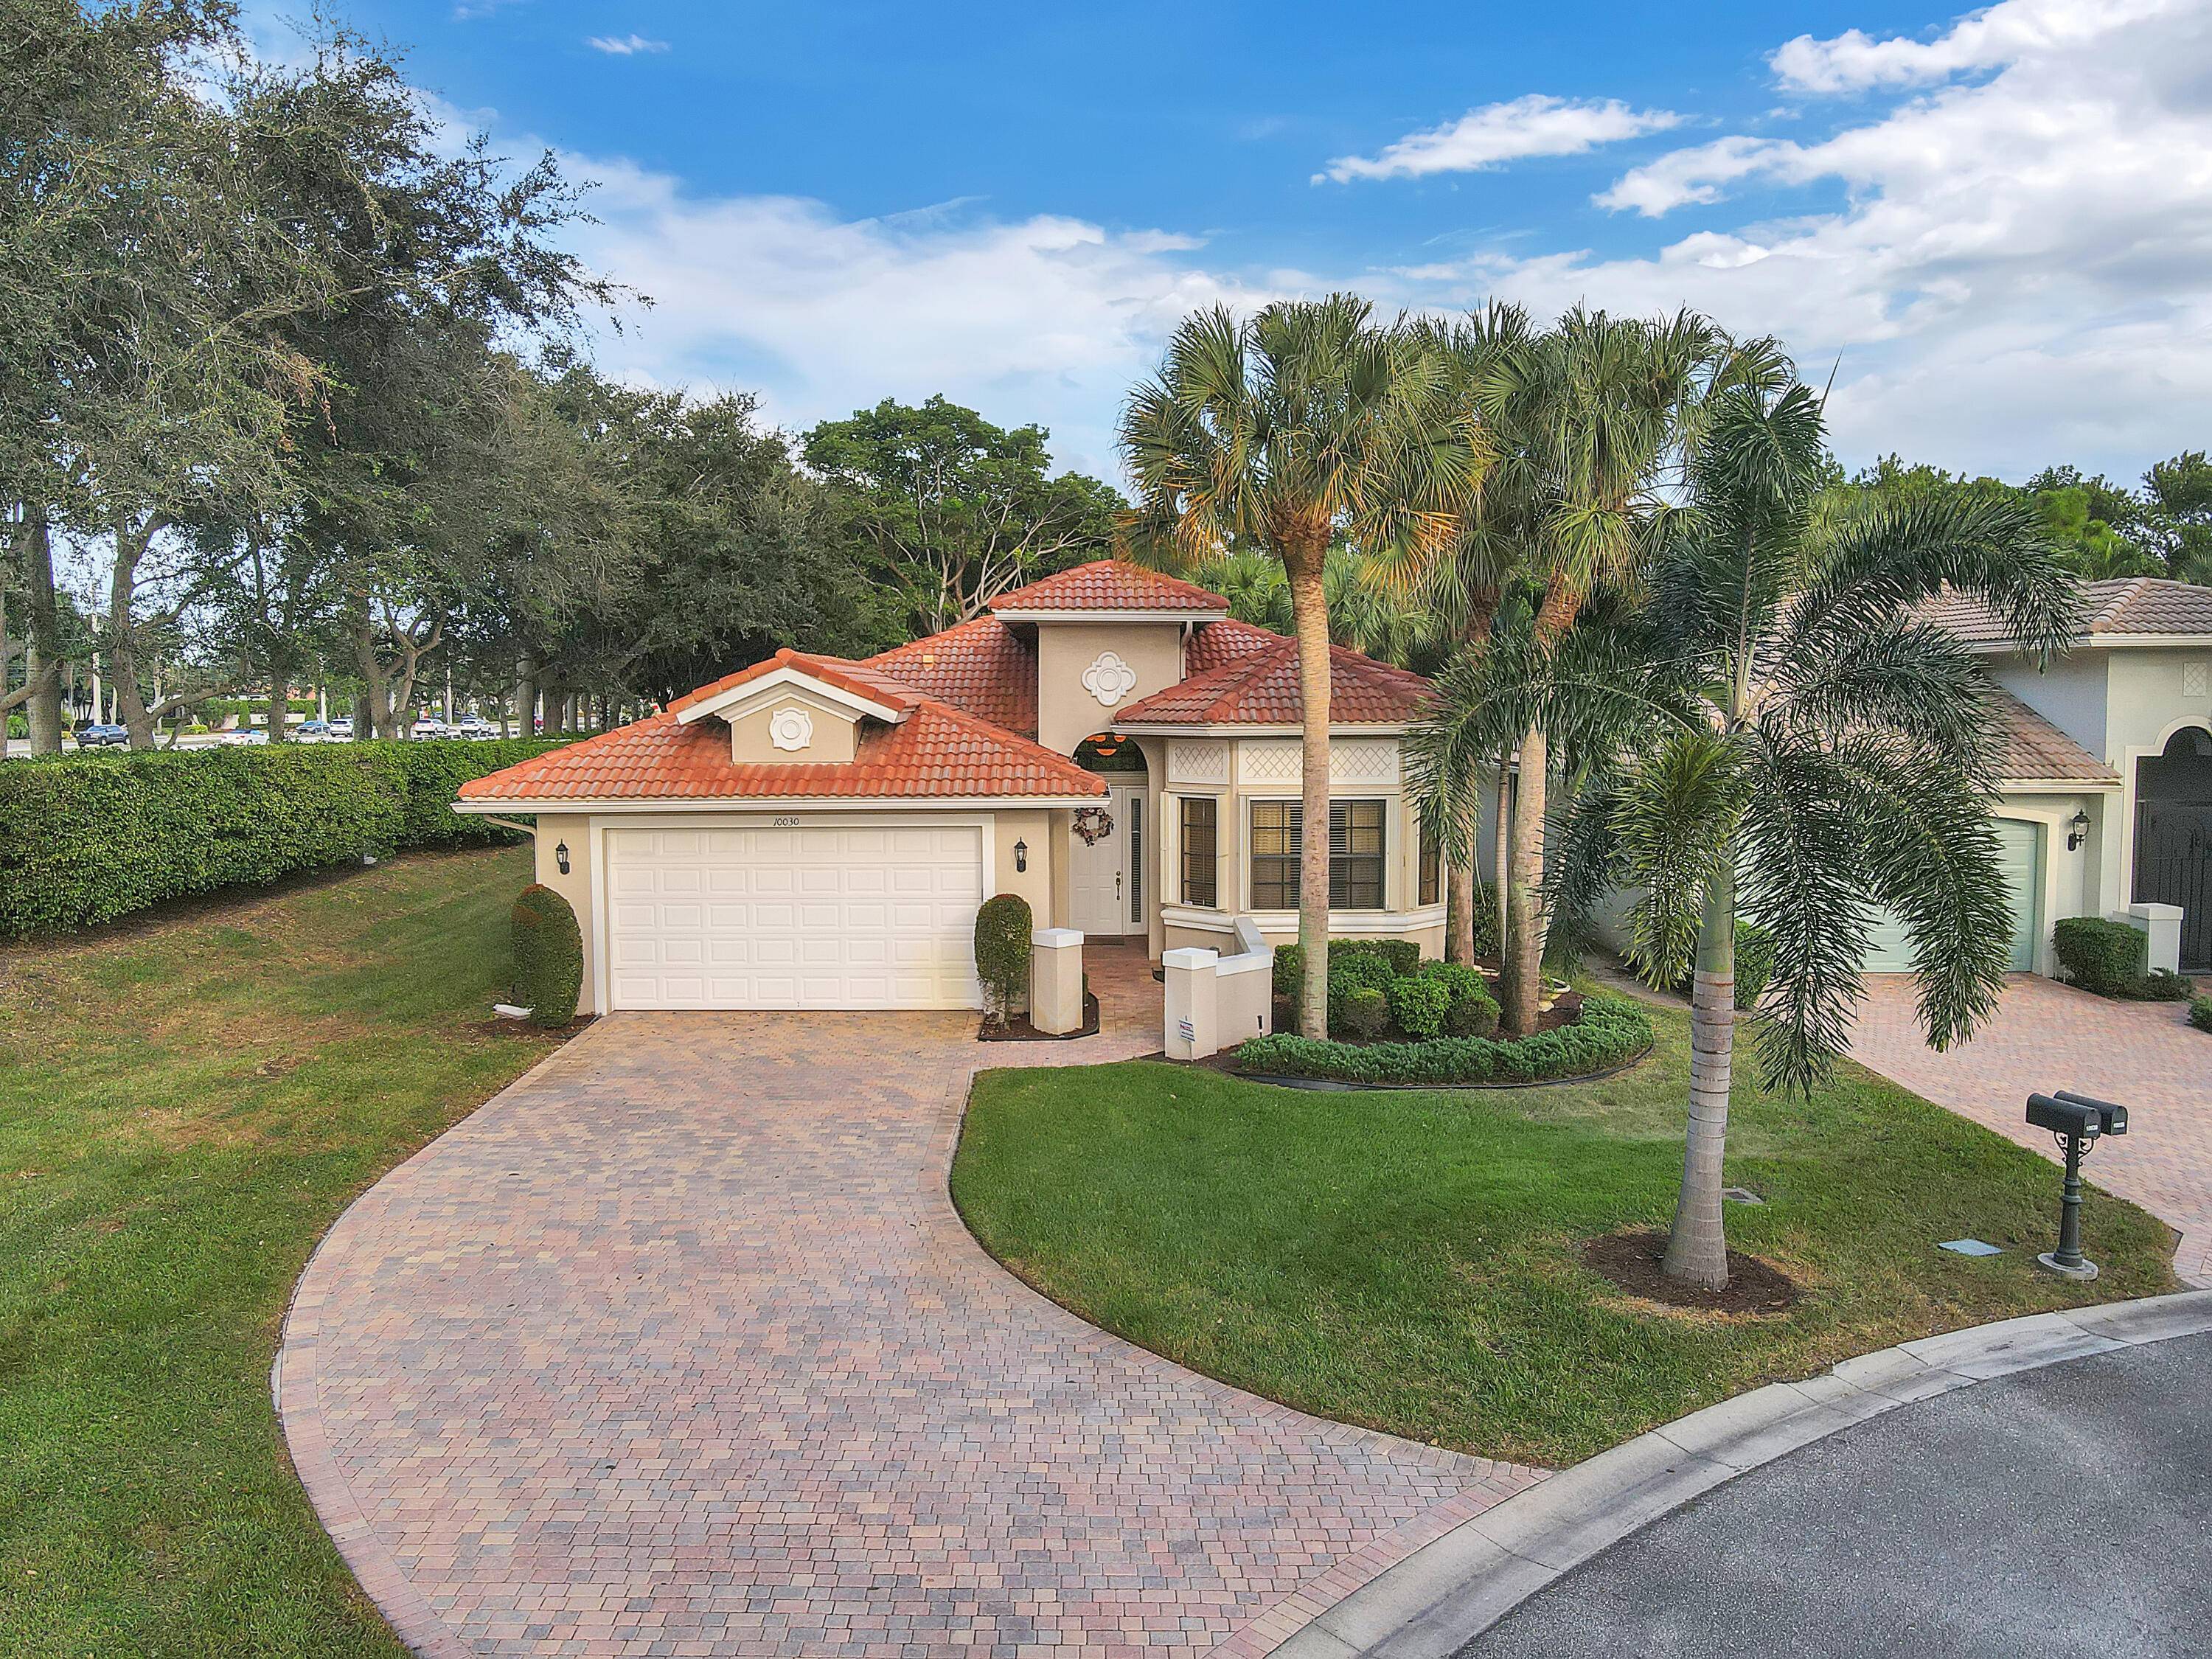 Discover a slice of Florida paradise in this impeccable 3BR, 2BA home located within the elite 55 Tivoli Lakes community in Boynton Beach.